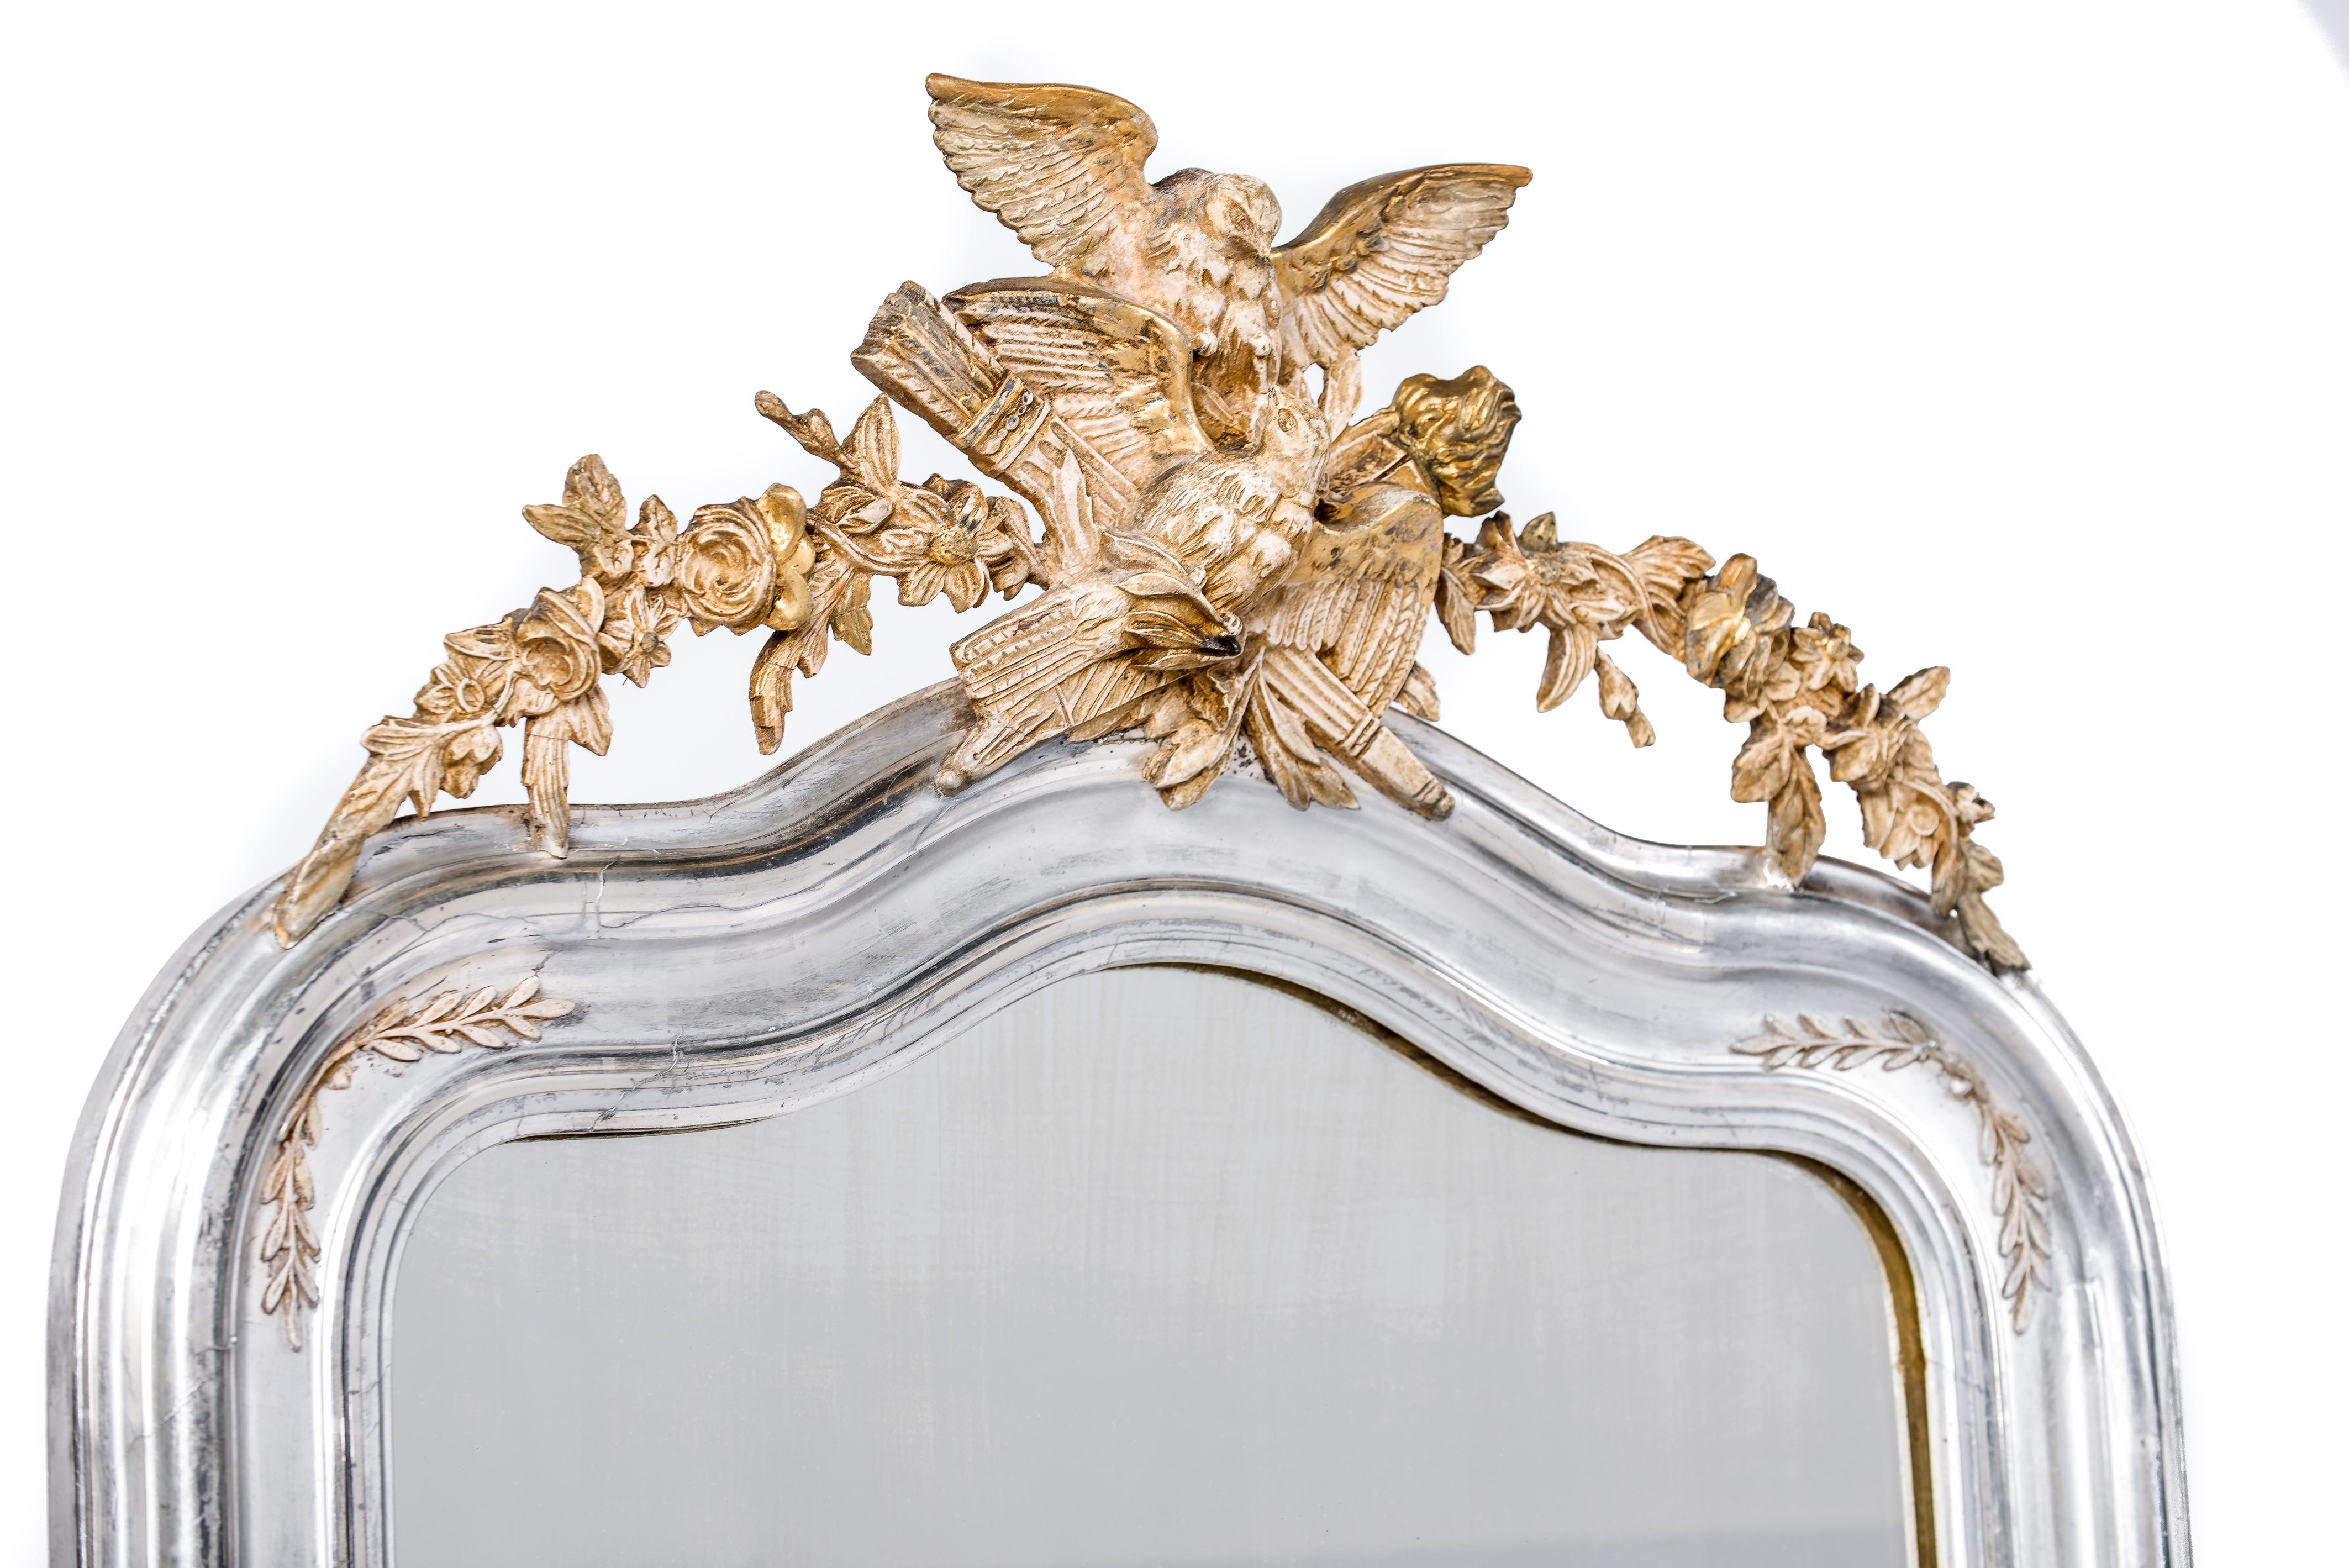 This unique mirror was made in Northern France at the end of the 19th century. The mirror frame has the upper rounded corners typical for the Louis Philippe style. The mirror features a serpentine shaped top enriched with an ornate crest. The crest